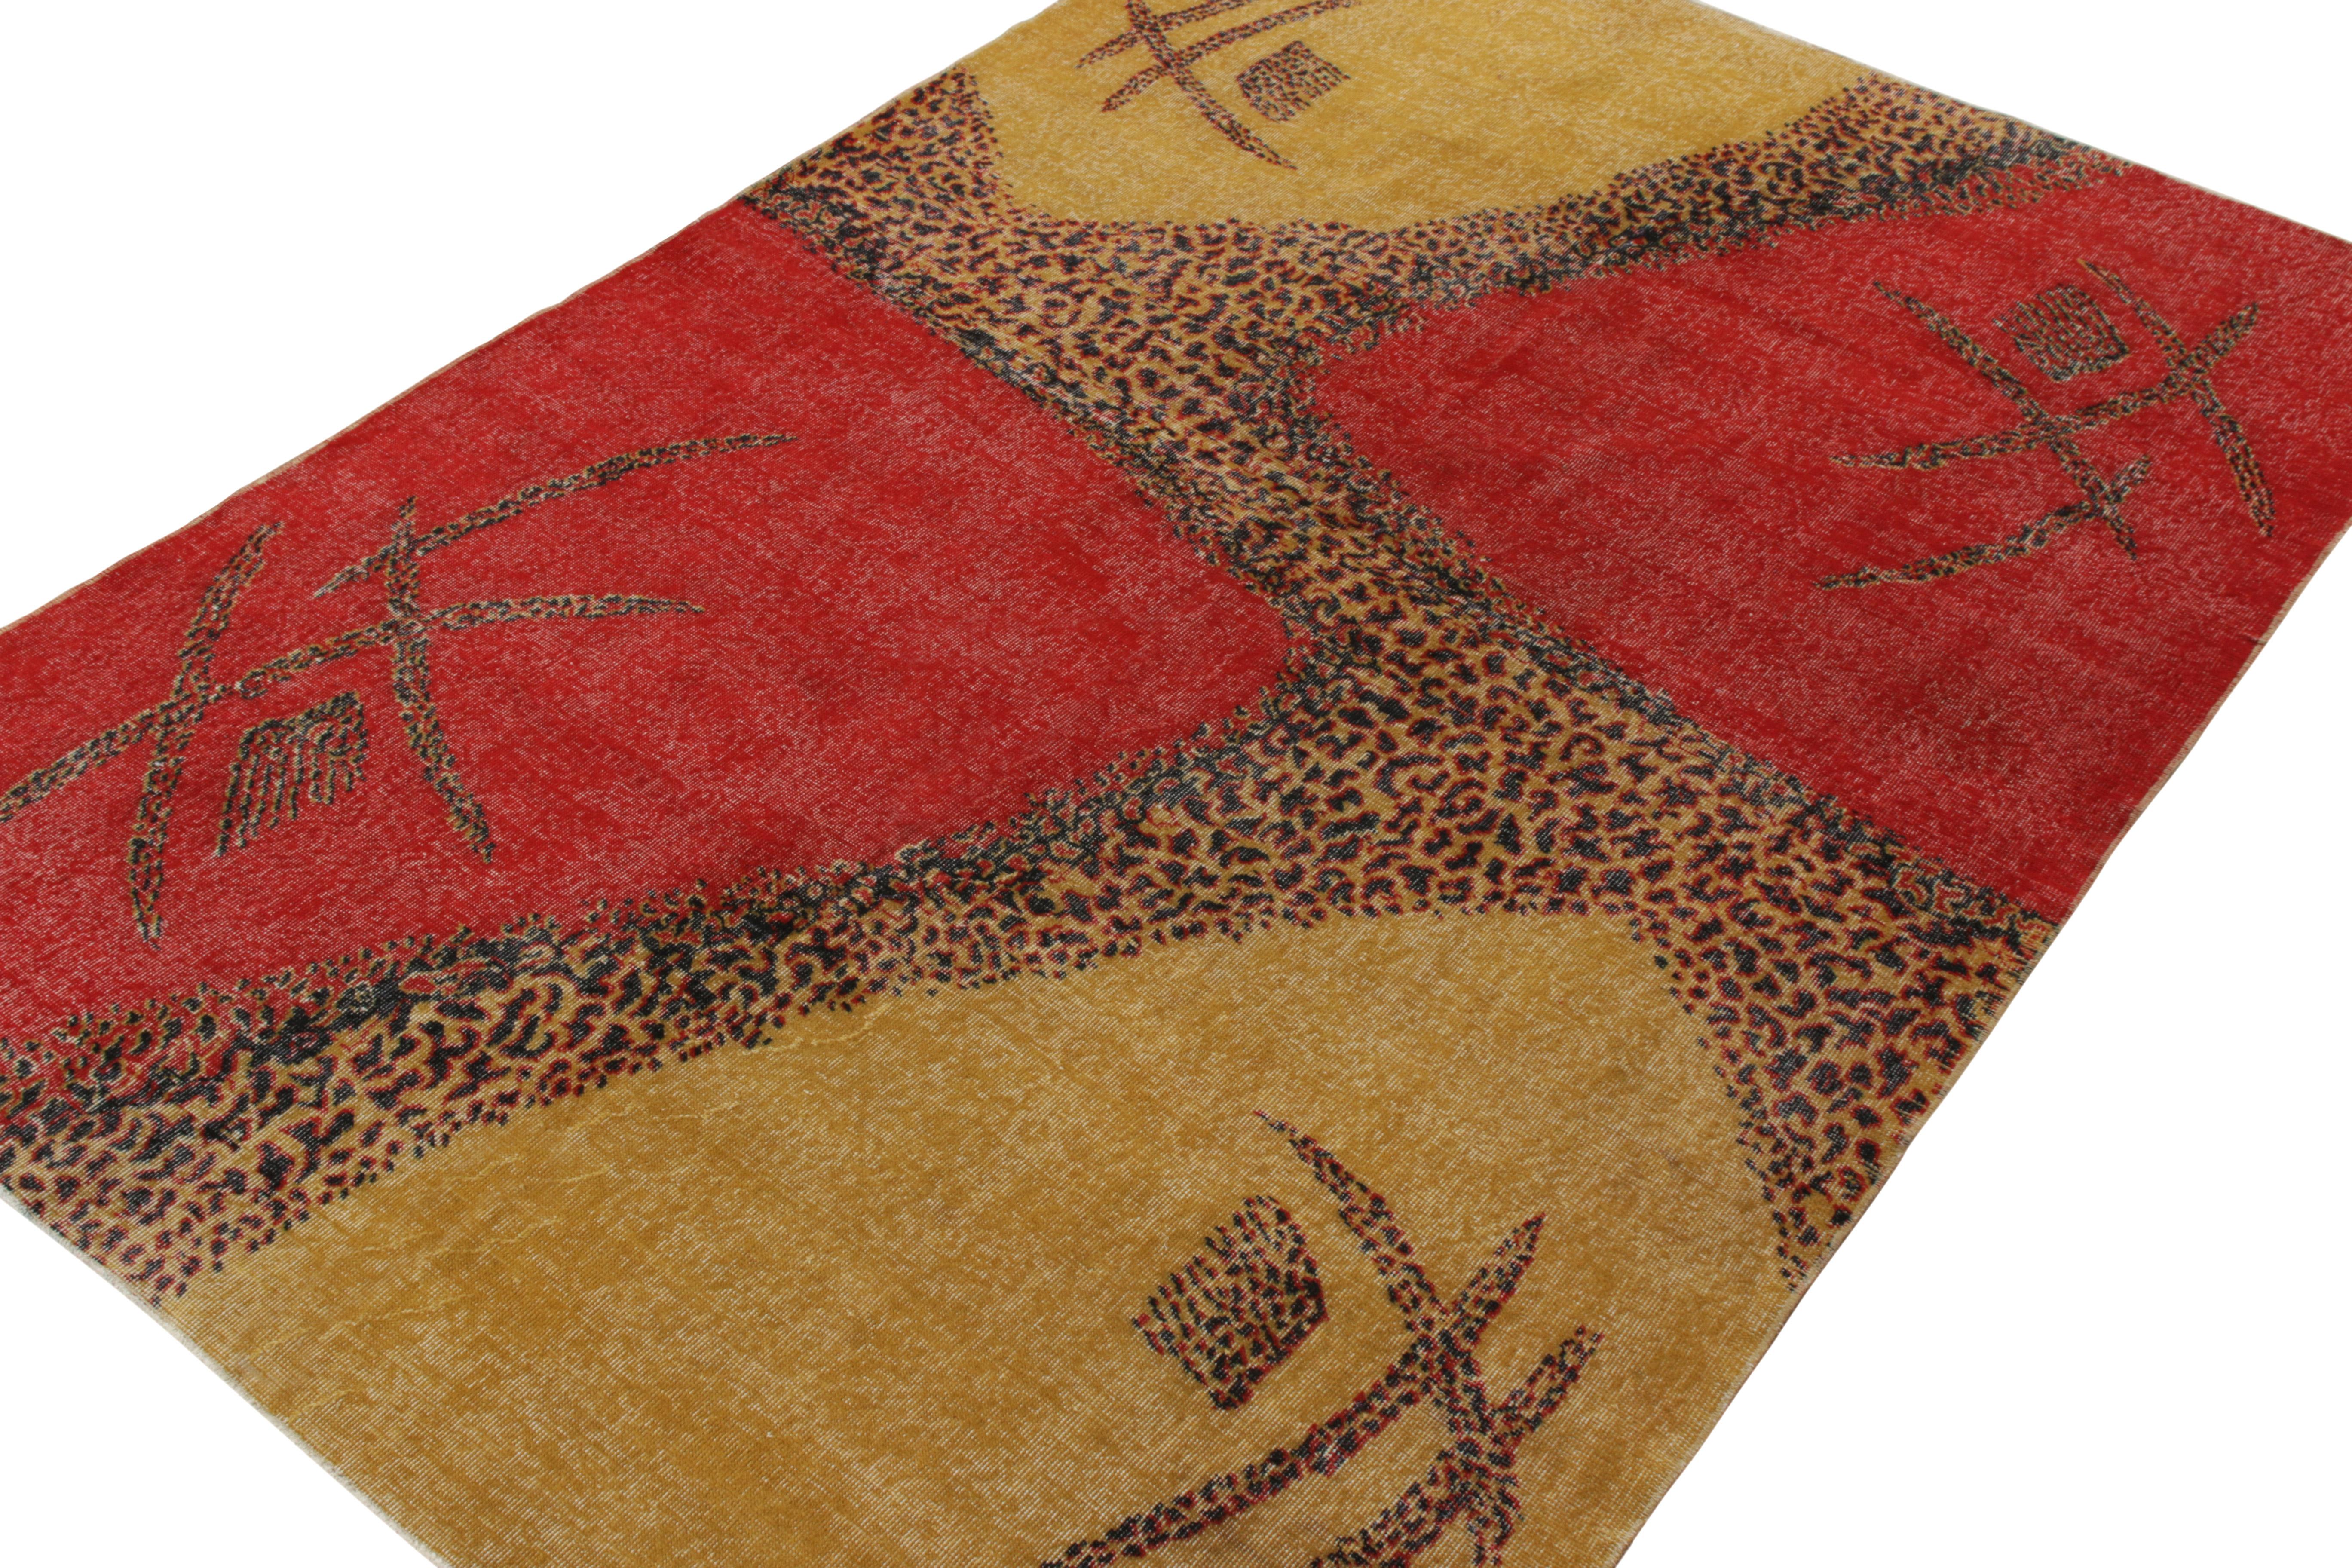 Turkish 1960s Vintage Art Deco Rug in Red, Gold-Yellow Geometric Pattern by Rug & Kilim For Sale